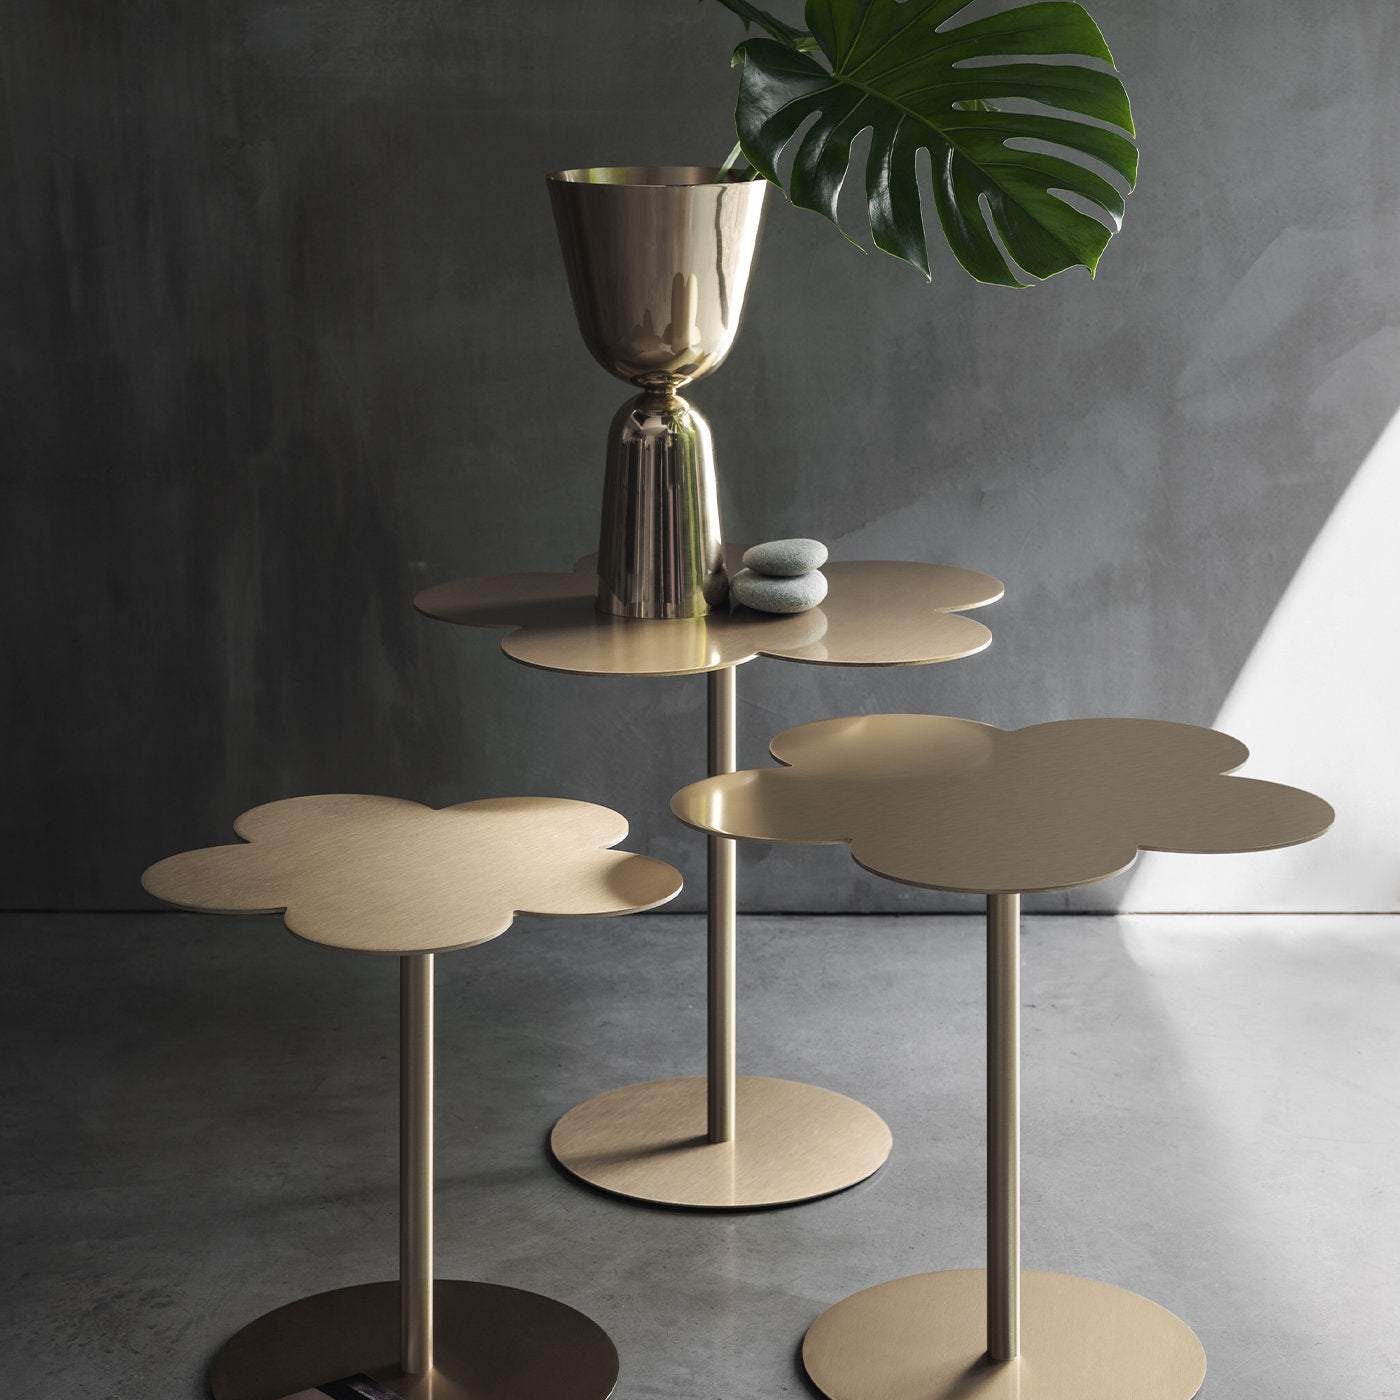 Flowers Large Brass Side Table by Stefano Giovannoni - Alternative view 1